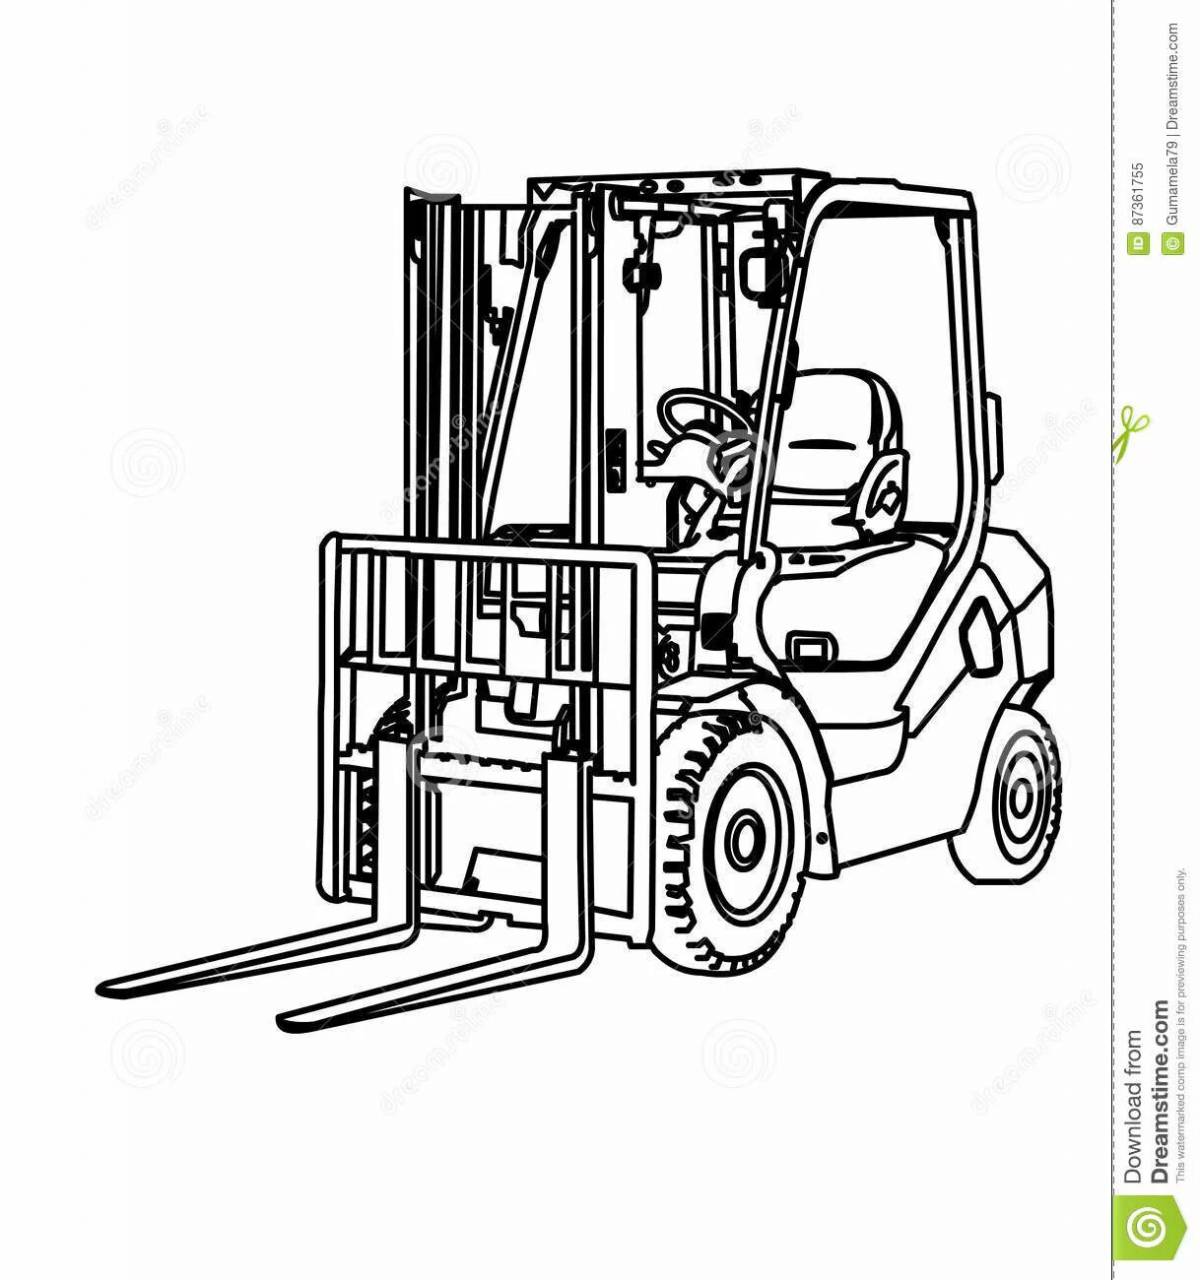 Fabulous forklift coloring page